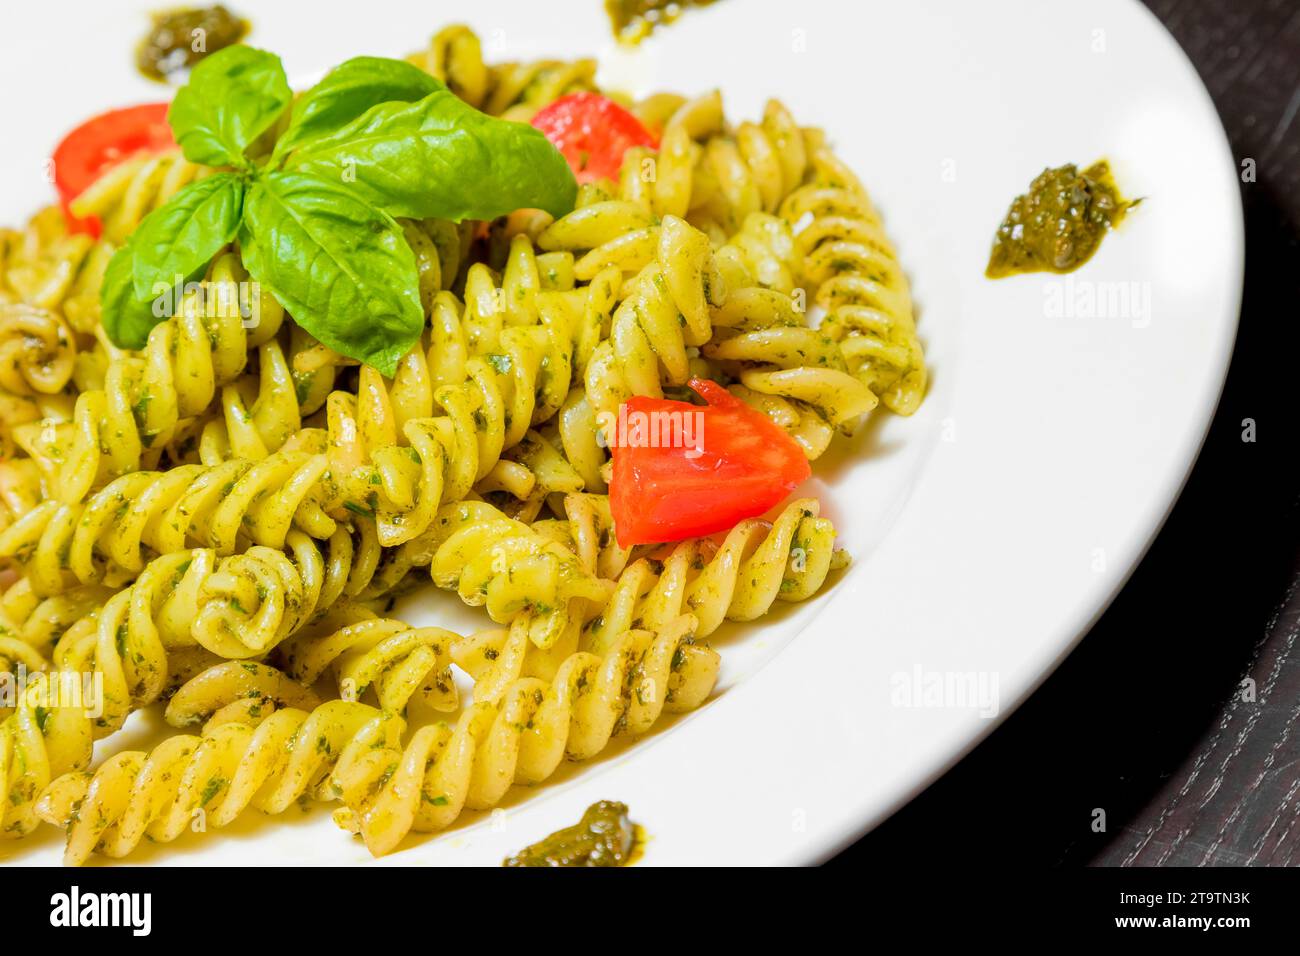 close-up of dish of pasta with pesto genovese sauce and vegetables, tomato and basil on black wood table Stock Photo